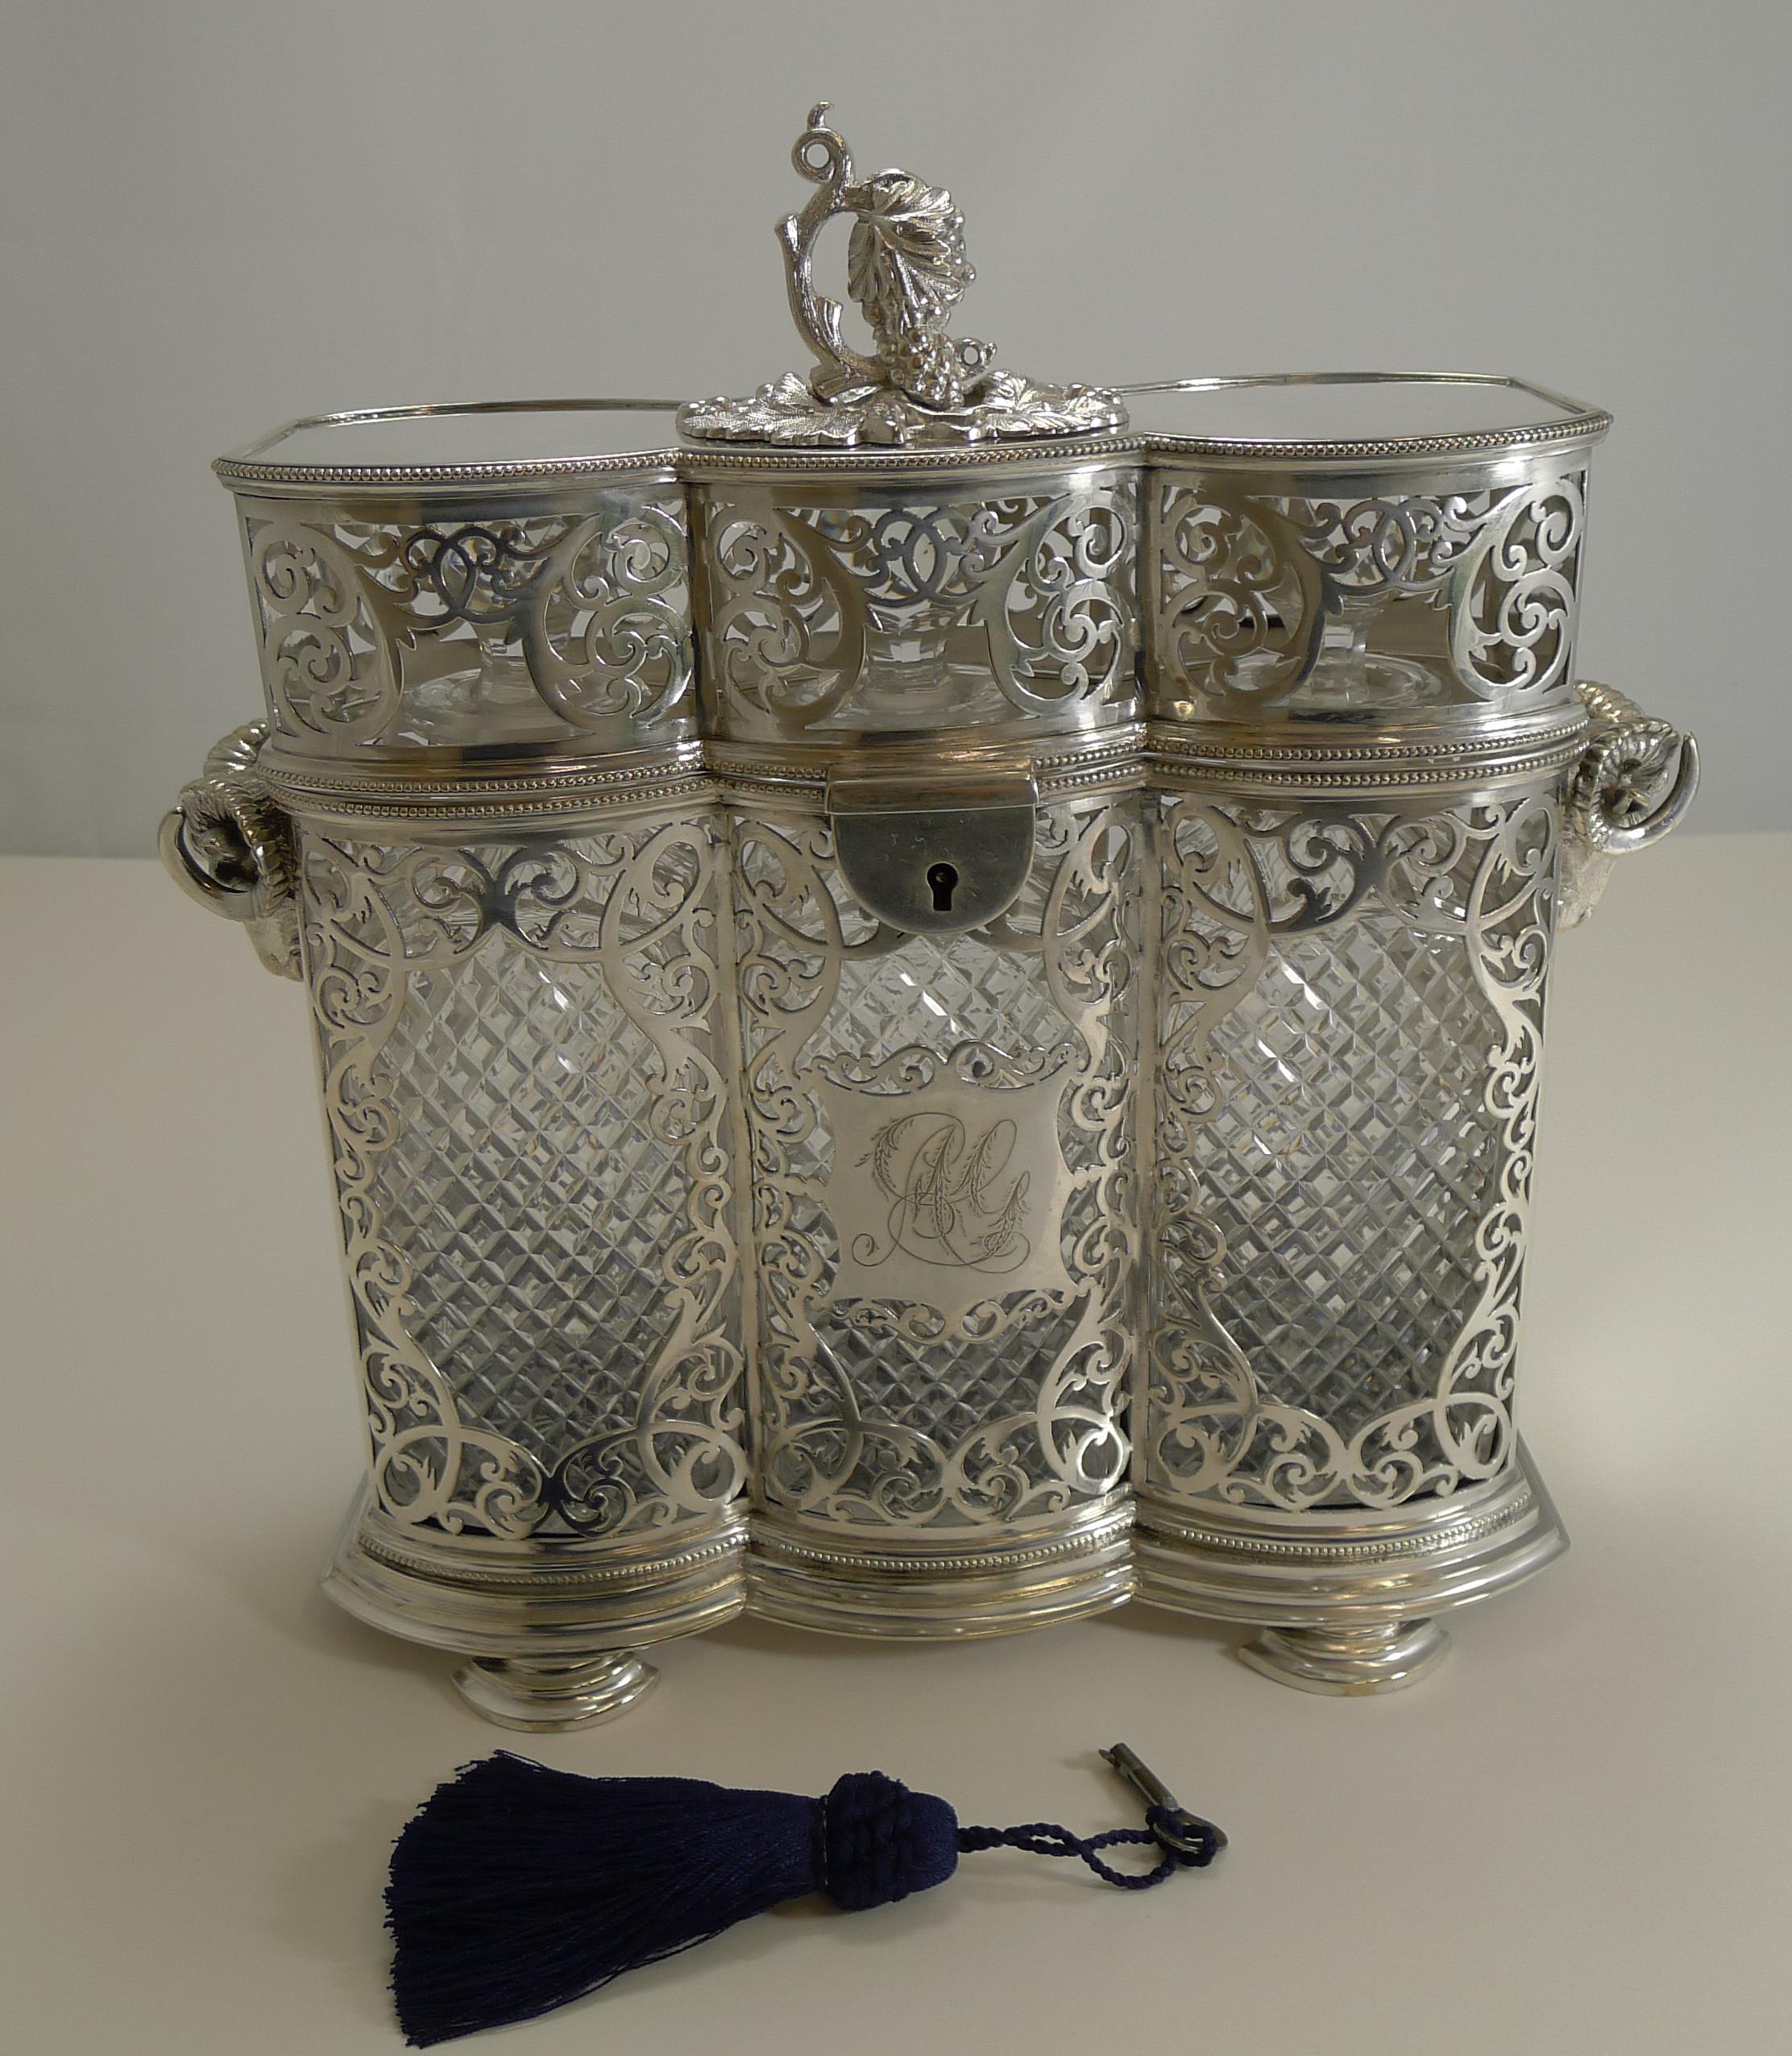 A truly magnificent three bottle decanter case made from silver plate and fully marked for the Sheffield silversmith's, Philip Ashberry & Sons, dating to circa 1870.

The silver case is exquisite beautifully reticulated or pierced with cut-out